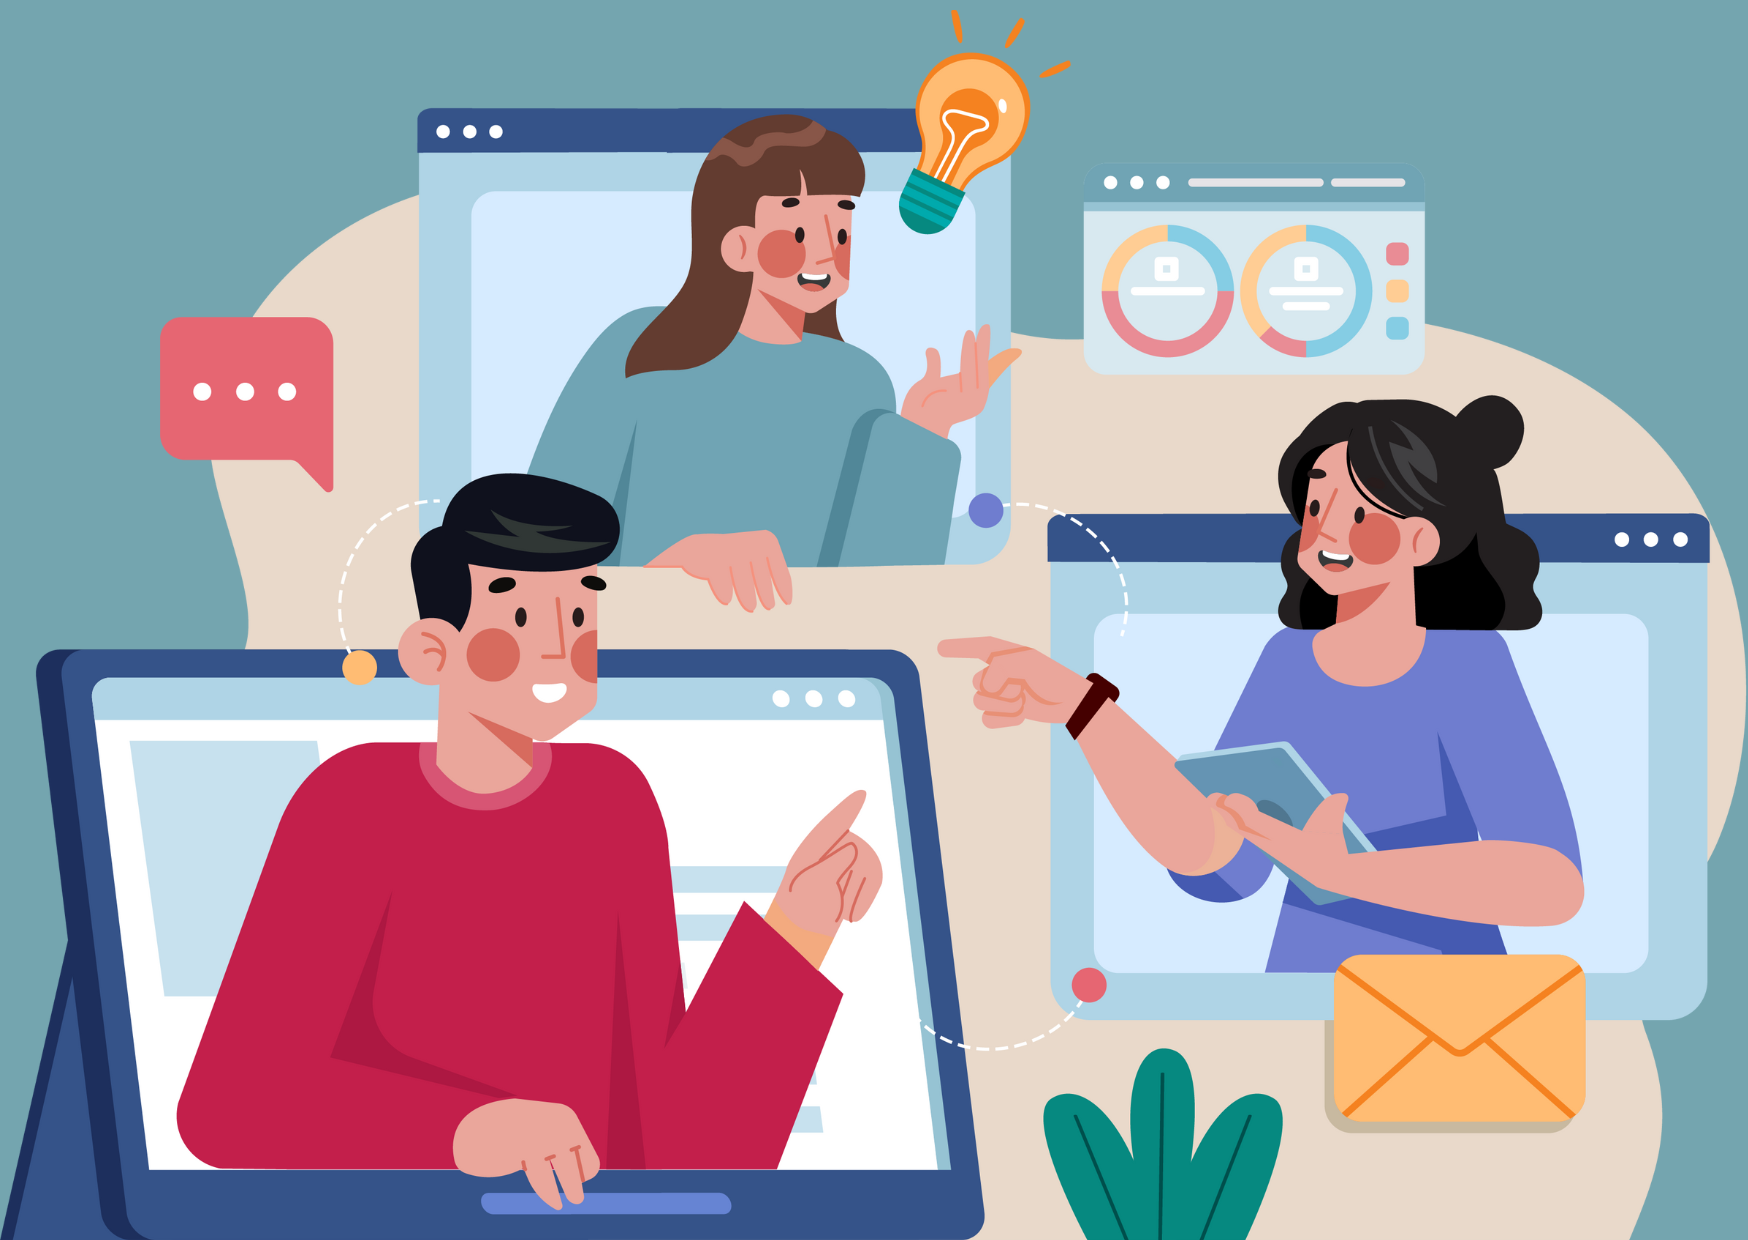 Featured image: People collaborate from their computers. - How Can Technology Make Your Business Meetings More Effective?